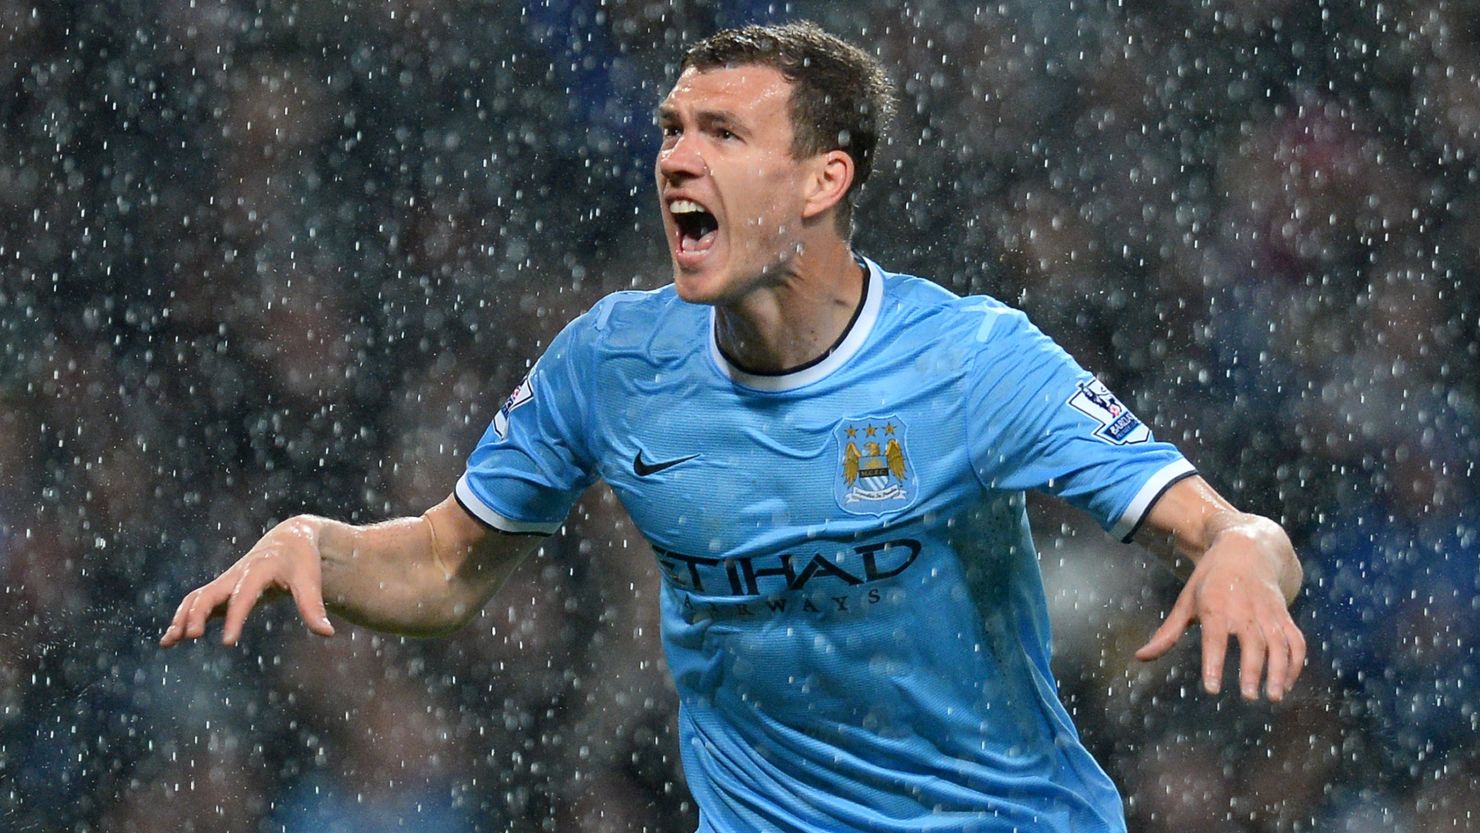 Edin Dzeko scored twice as Manchester City moved to within touching distance of the Premier League title.